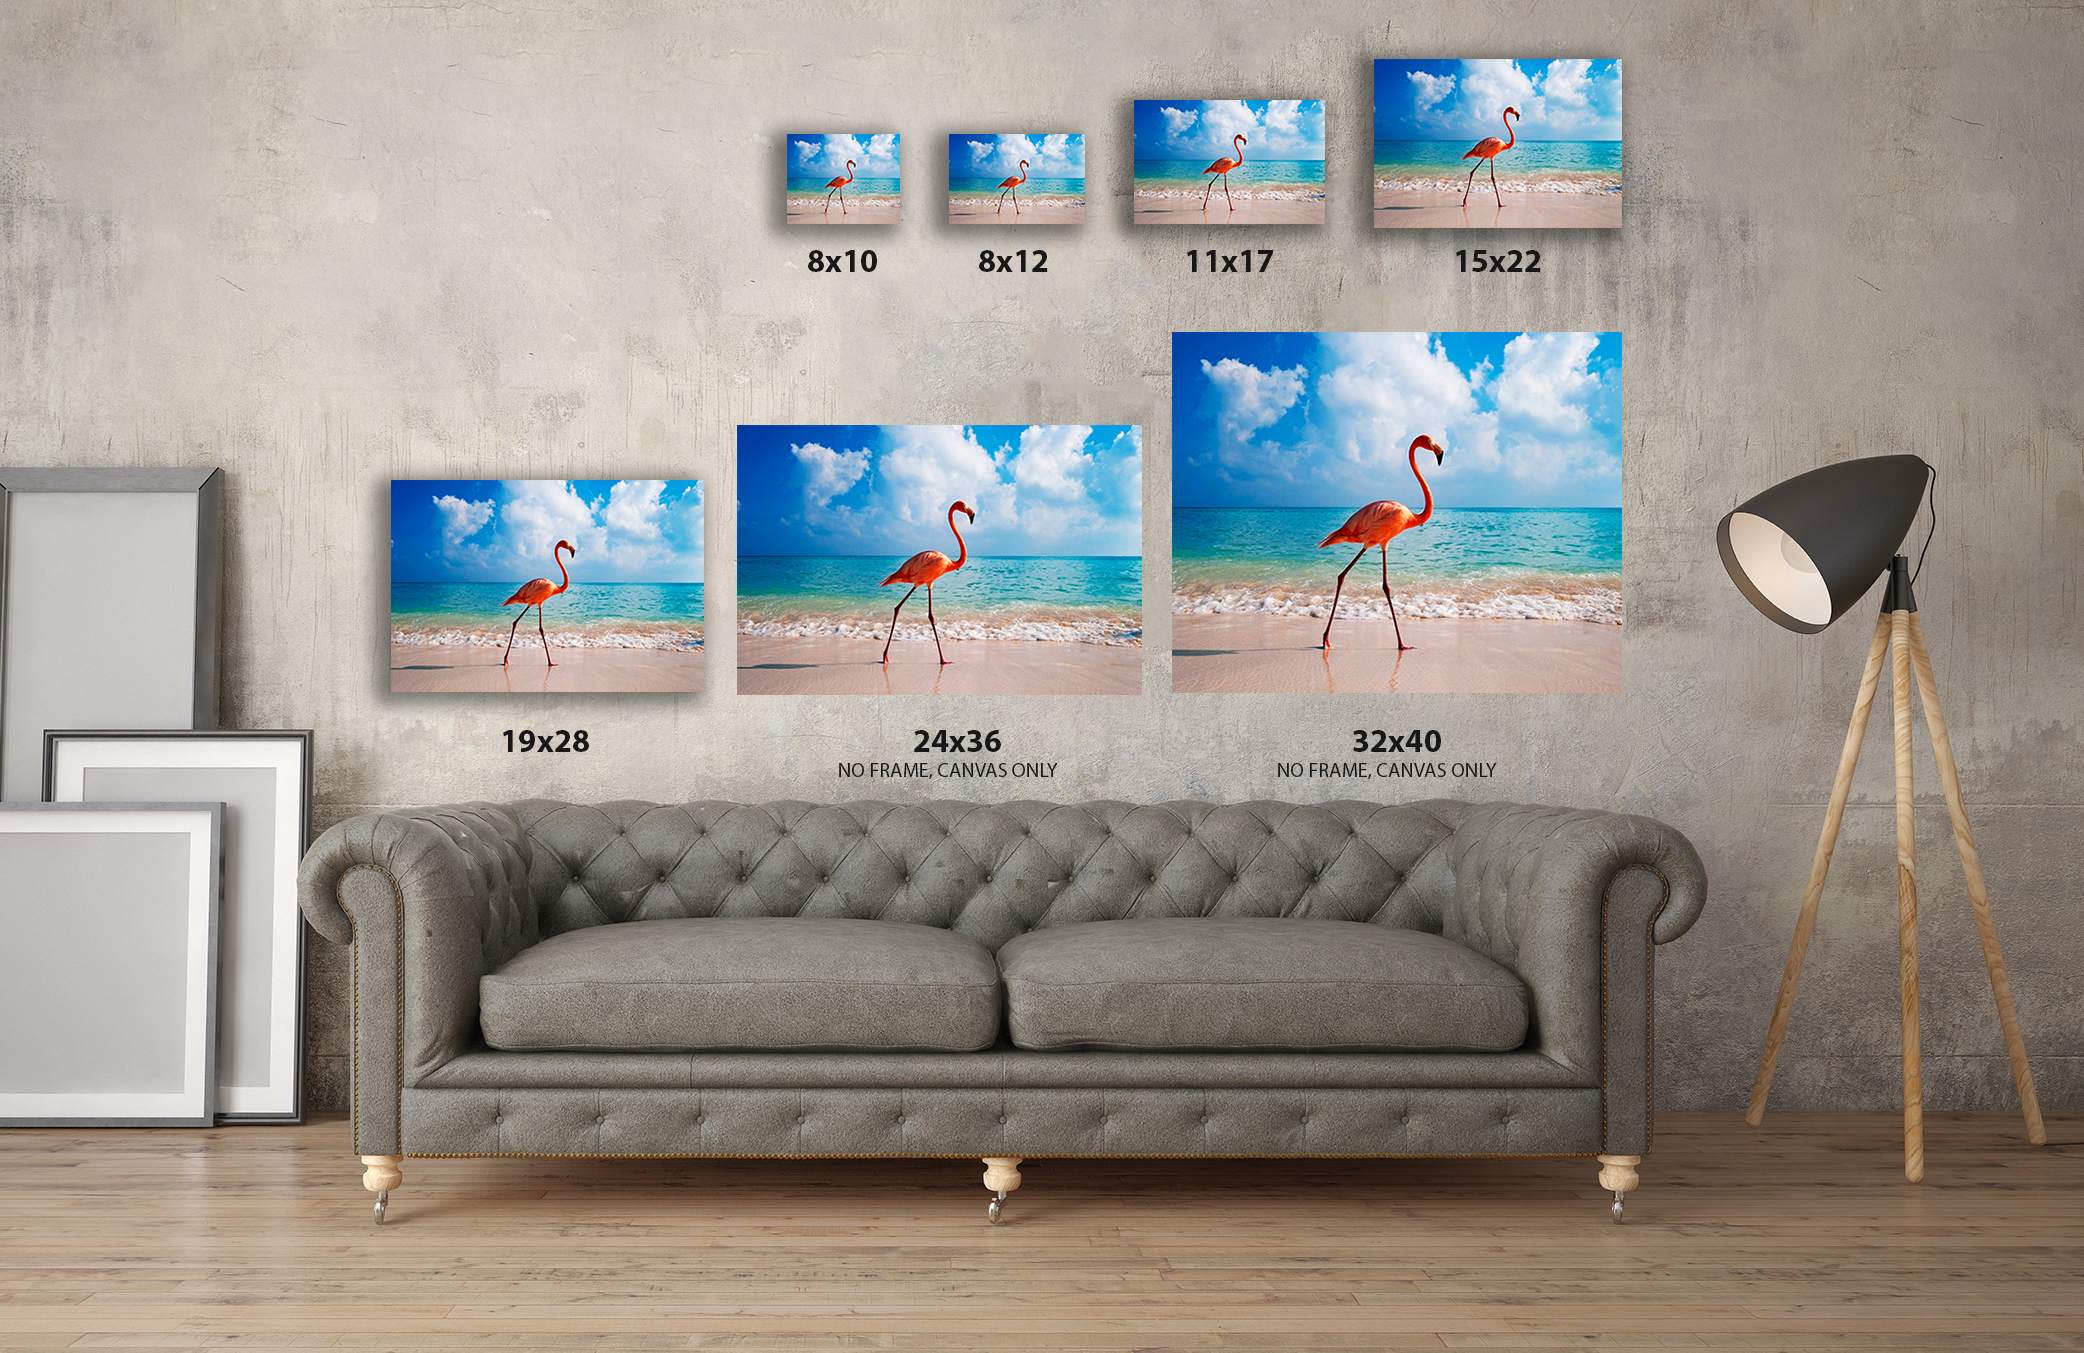 Awkward Styles Flamingos Illustration Pink Room Wall Art Beach Decals Room Decor Sea Room Decorations Flamingo Room Wall Decor Flamingo Canvas Decor Ideas Ready to Hang Picture Home Decor Ideas - image 3 of 7